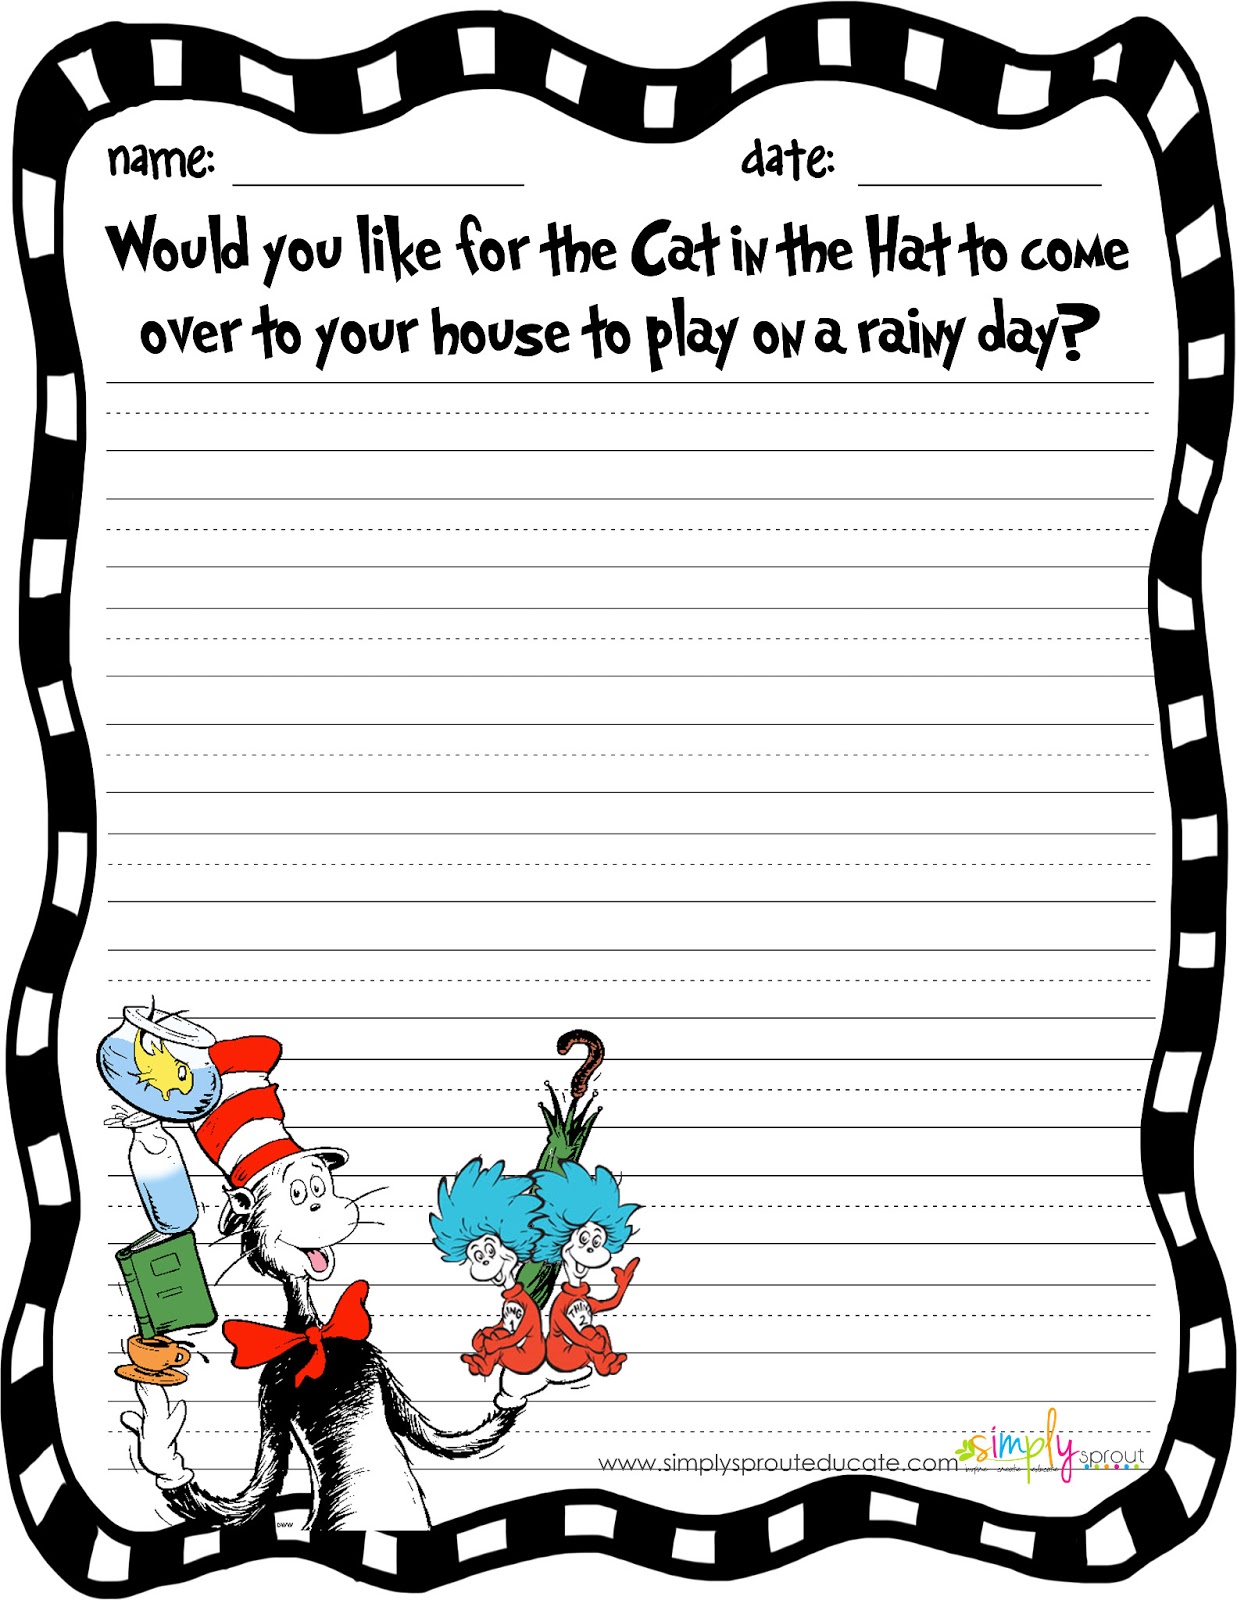 the-cat-in-the-hat-worksheets